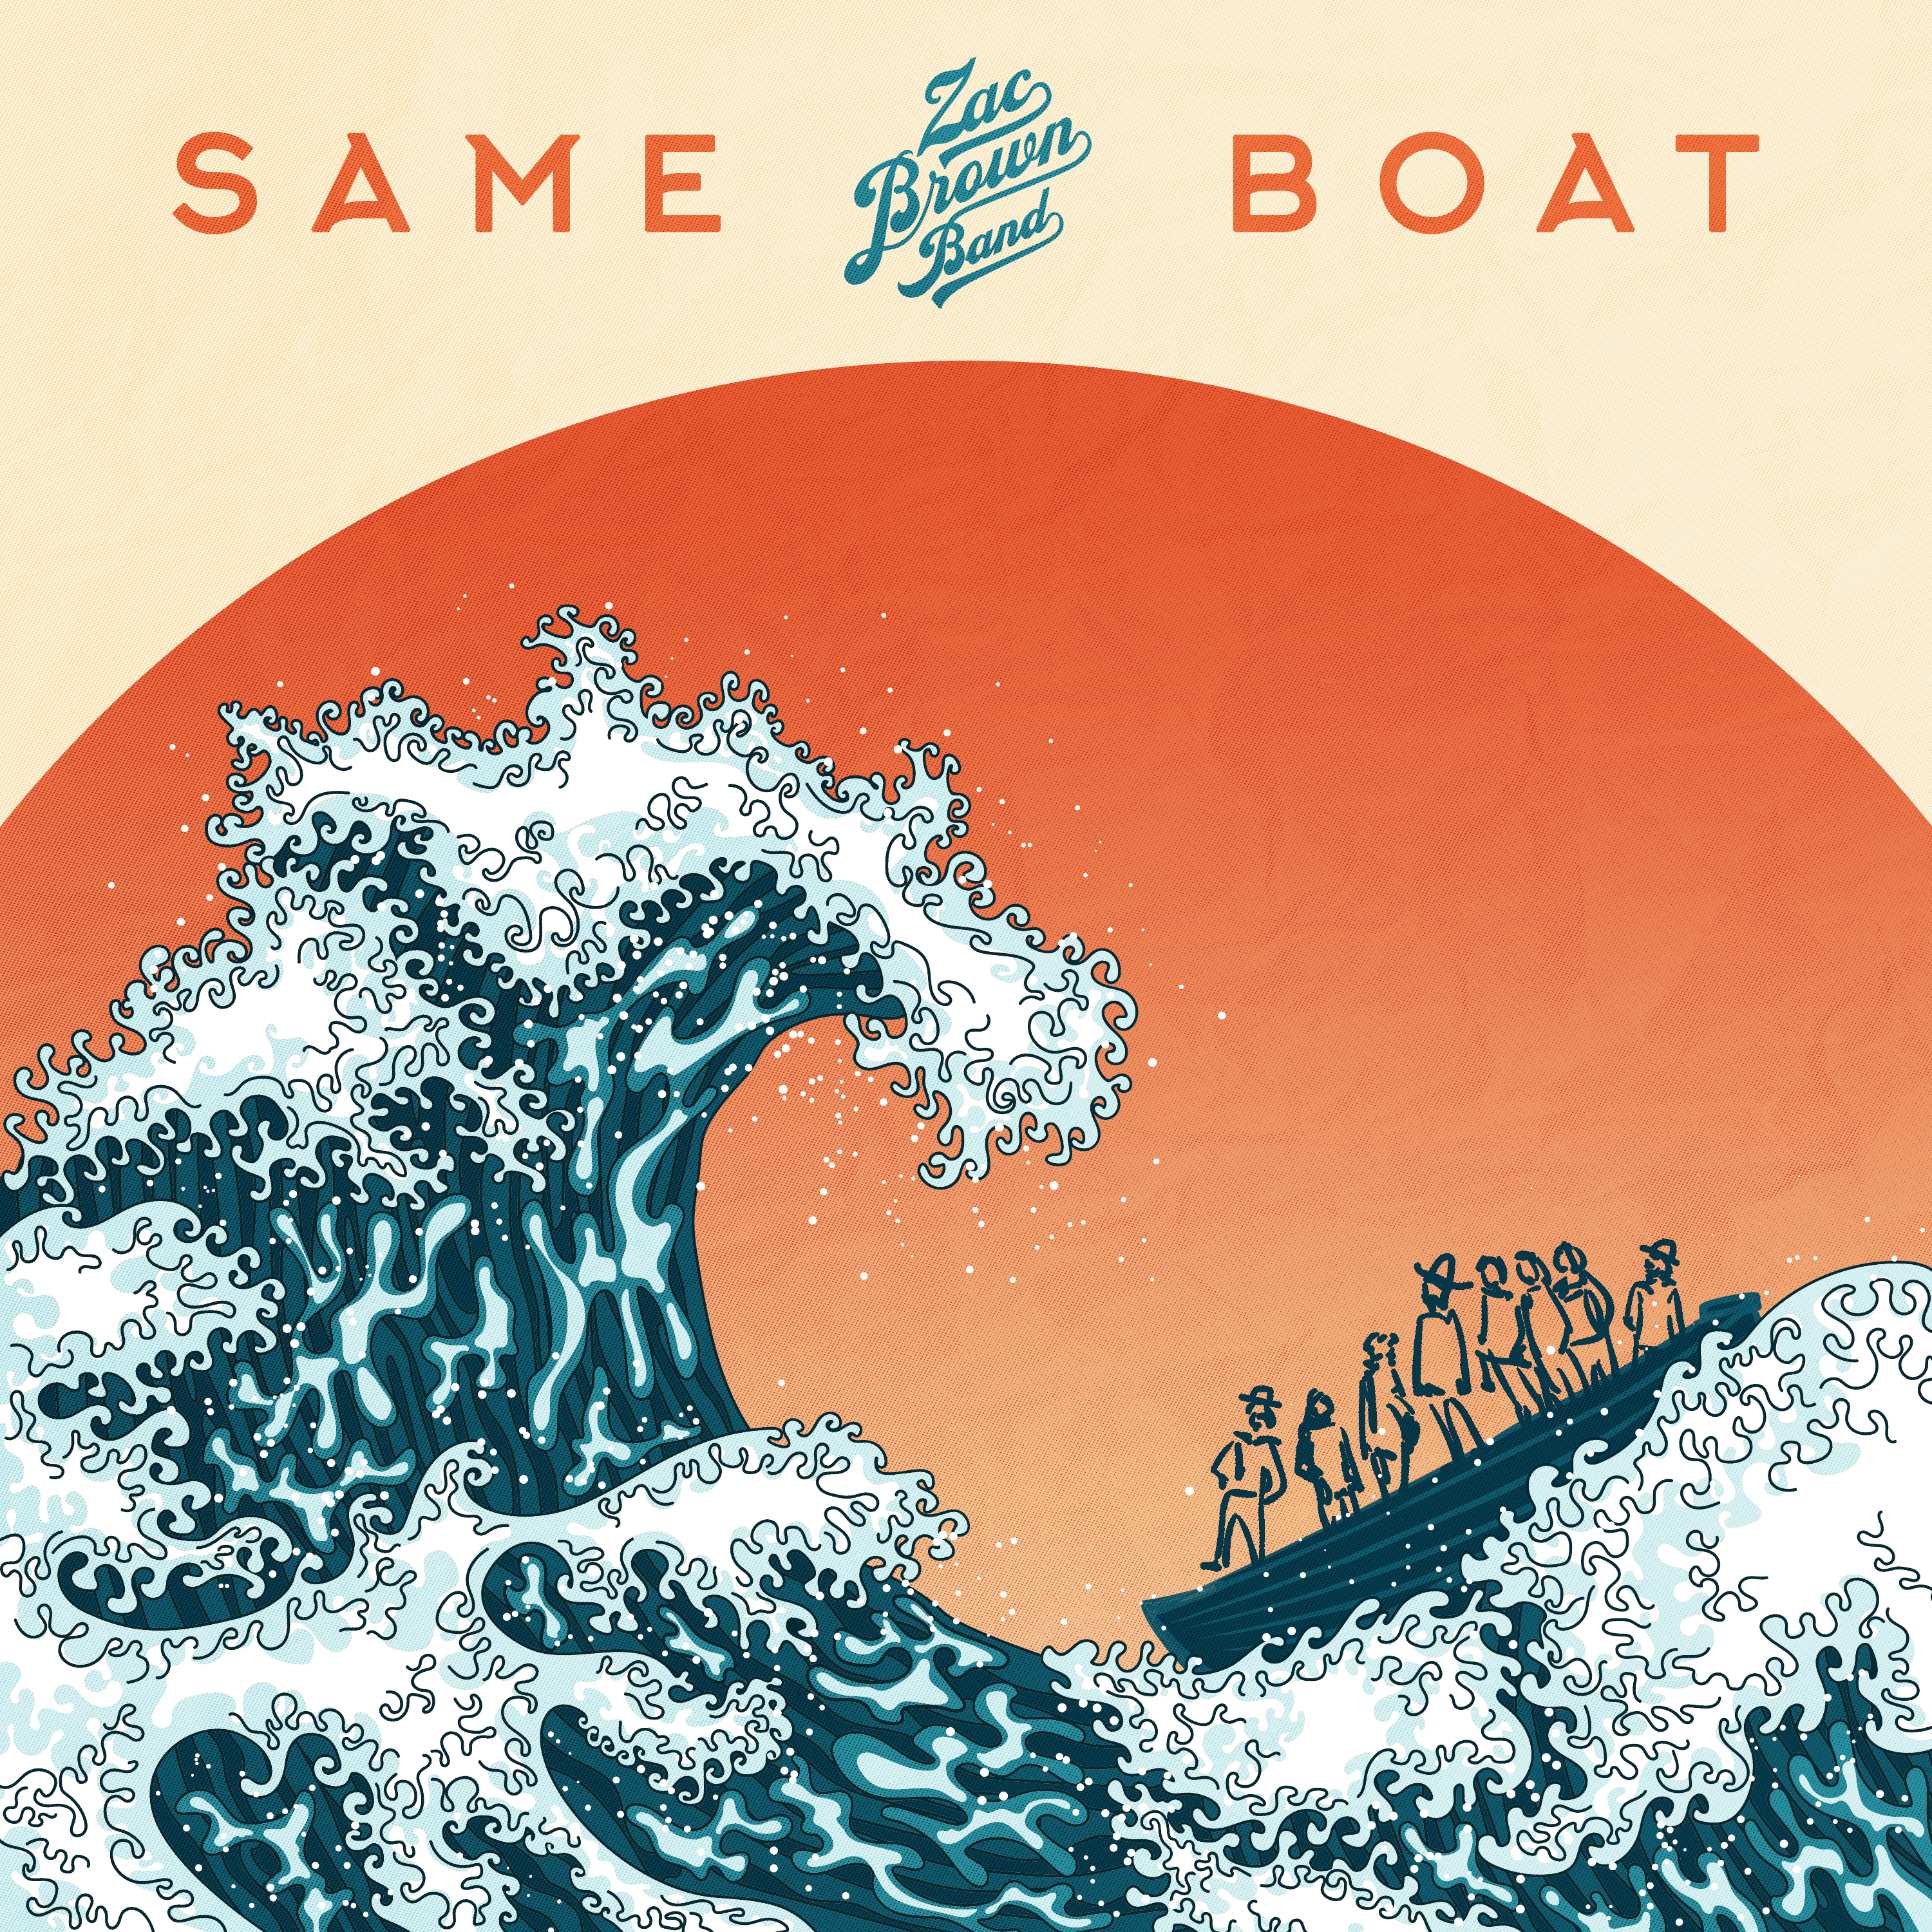 ZAC BROWN BAND TO RELEASE NEW SINGLE, “SAME BOAT”